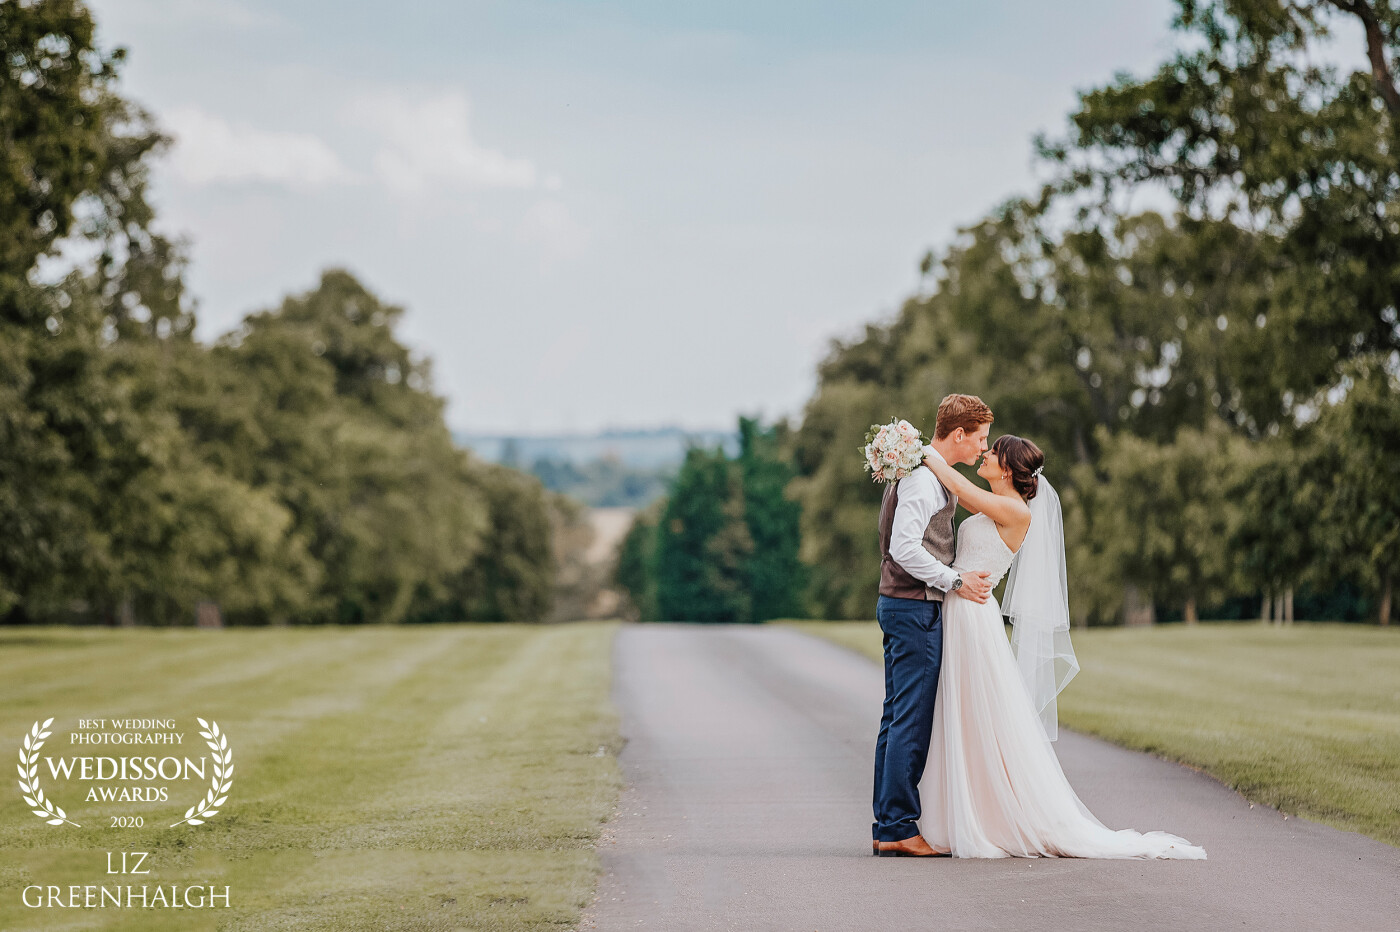 With the wonderful long driveway and views over the local countryside, we took a few moments away from everyone to celebrate being married and created some wonderful photographs.